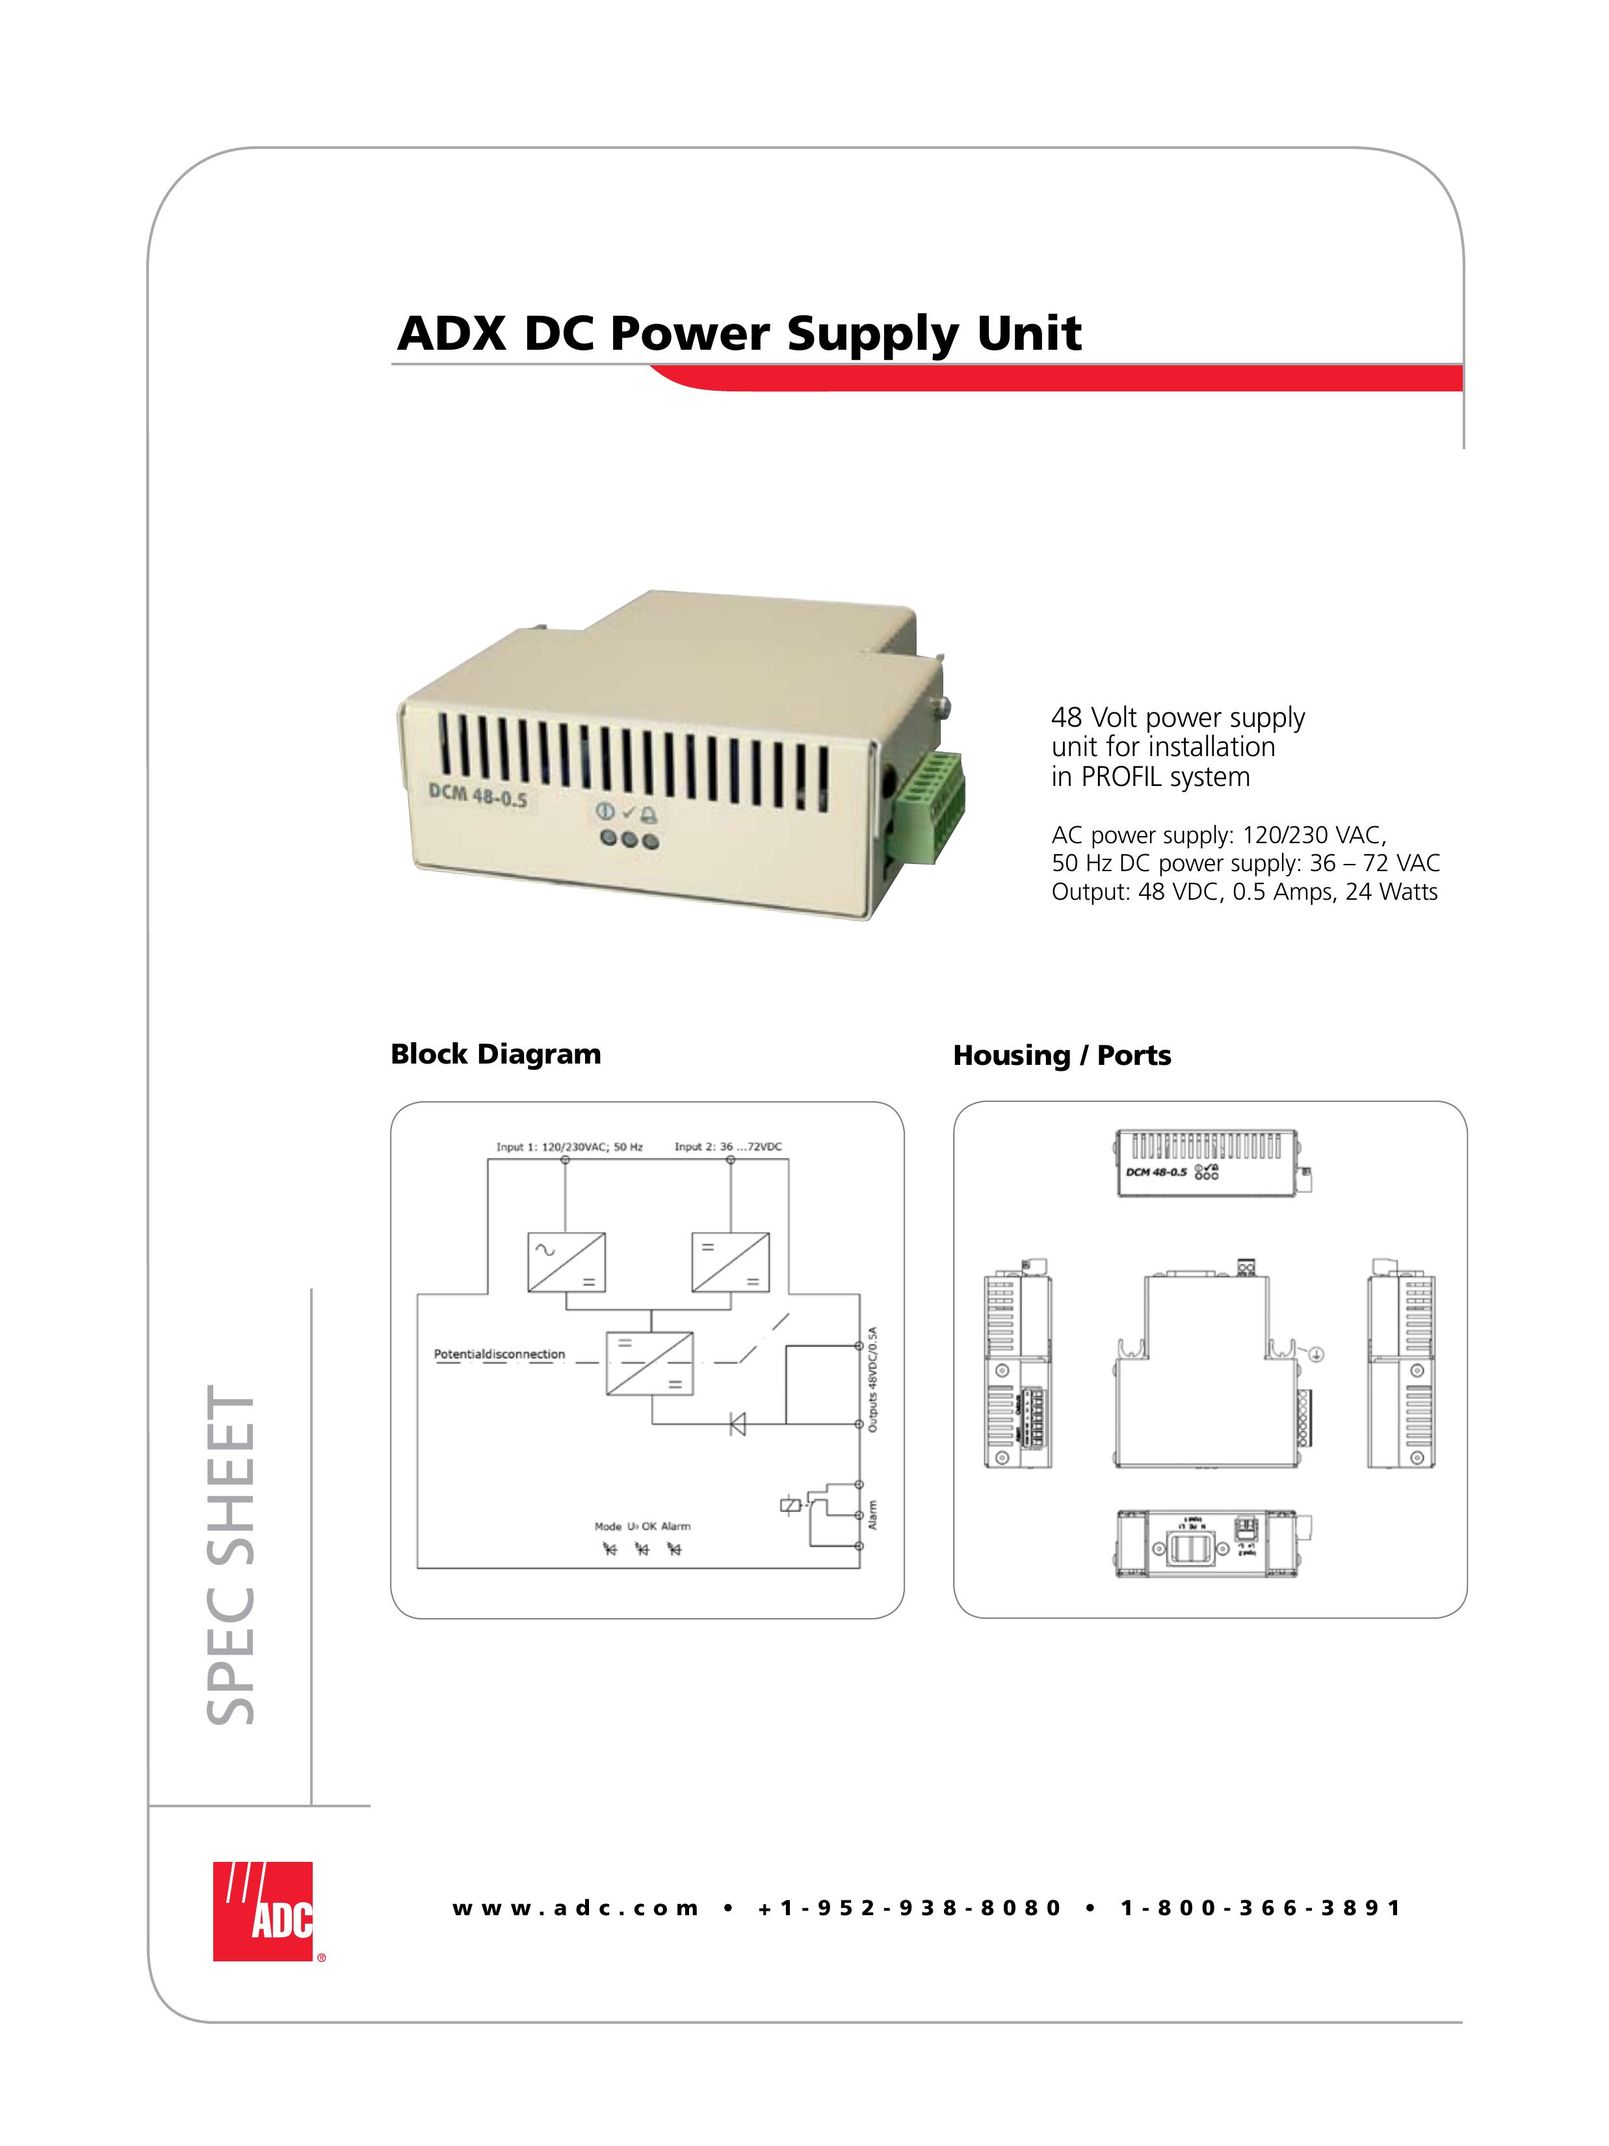 ADC ADX DC Power Supply User Manual